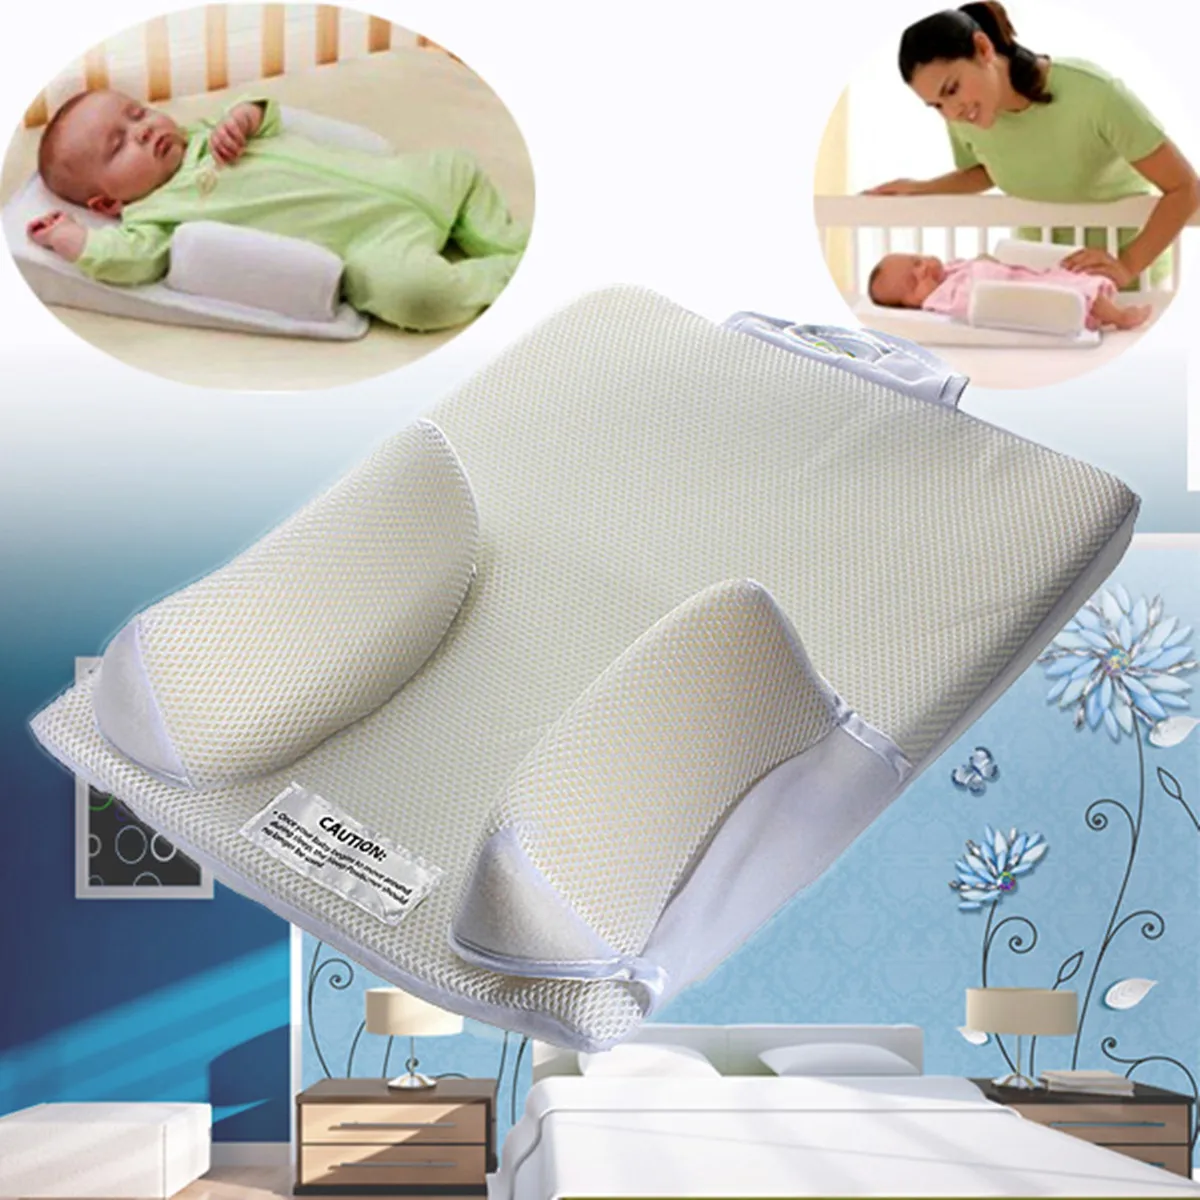 Green YOUTHINK Baby Pillow Cotton Breathable Infant Prevent Flat Head Anti Roll Pillow Sleeping Positioner Infant Head Protection Cushion for Newborn